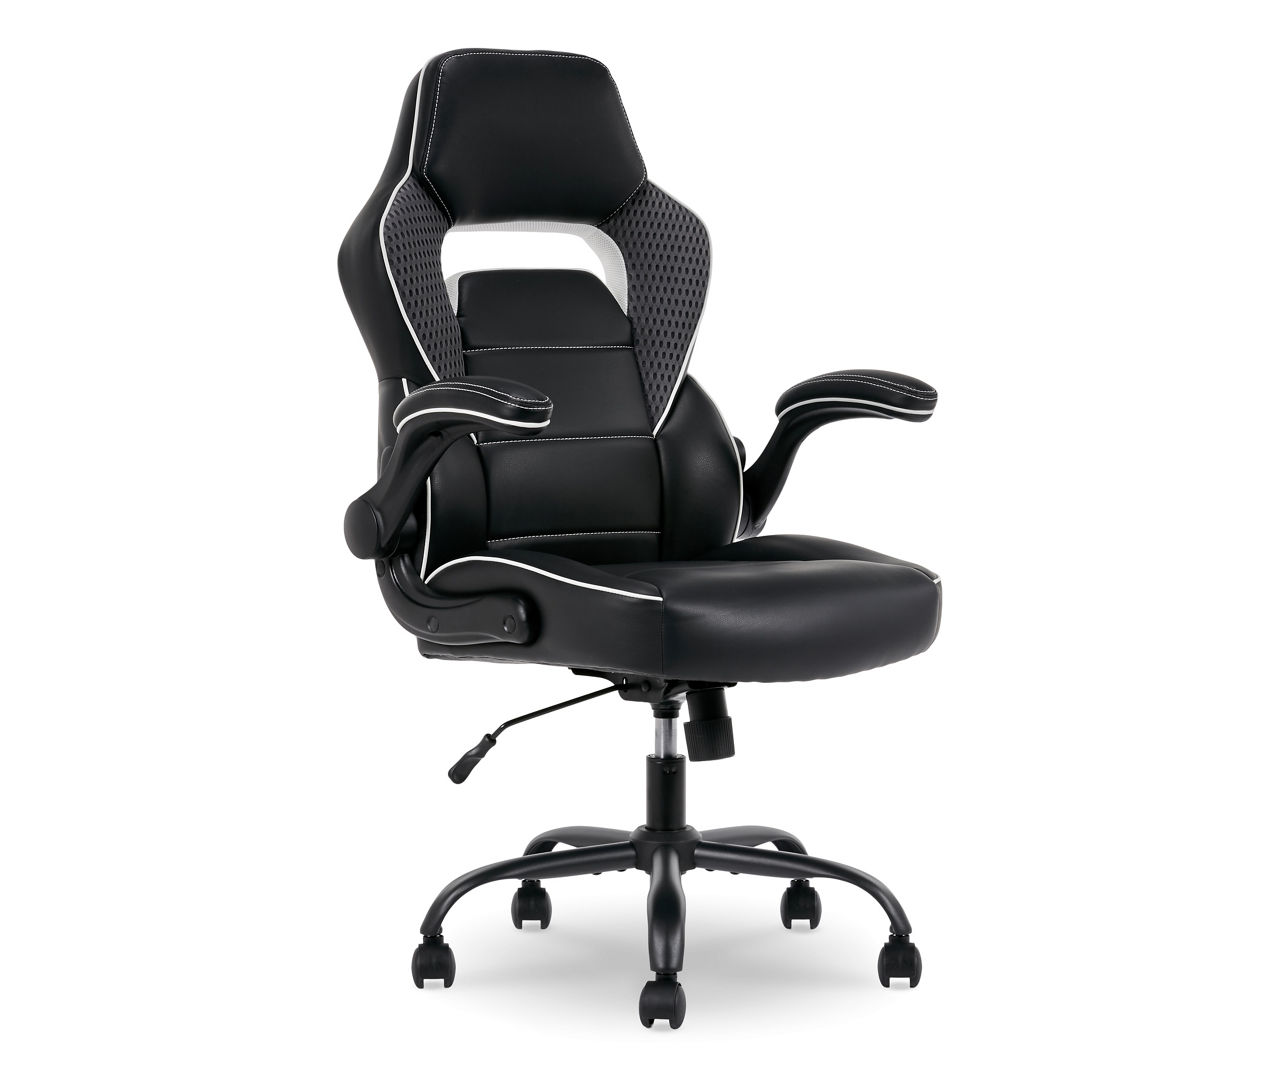 Gamer Gear Gaming Office Chair with Extendable Leg Rest, Black Fabric